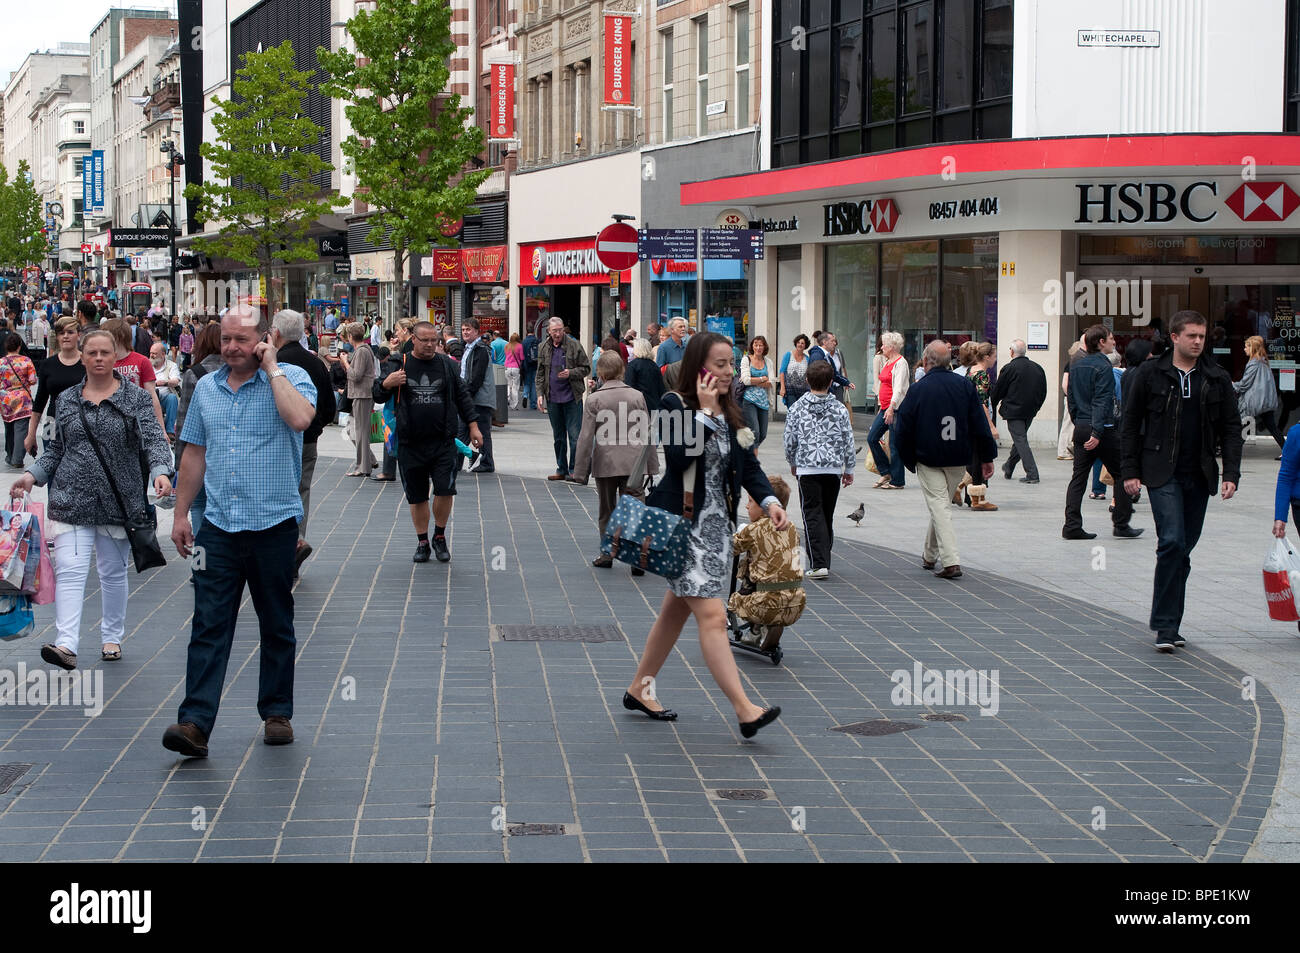 a typical day in the city centre of liverpool, england, uk Stock Photo